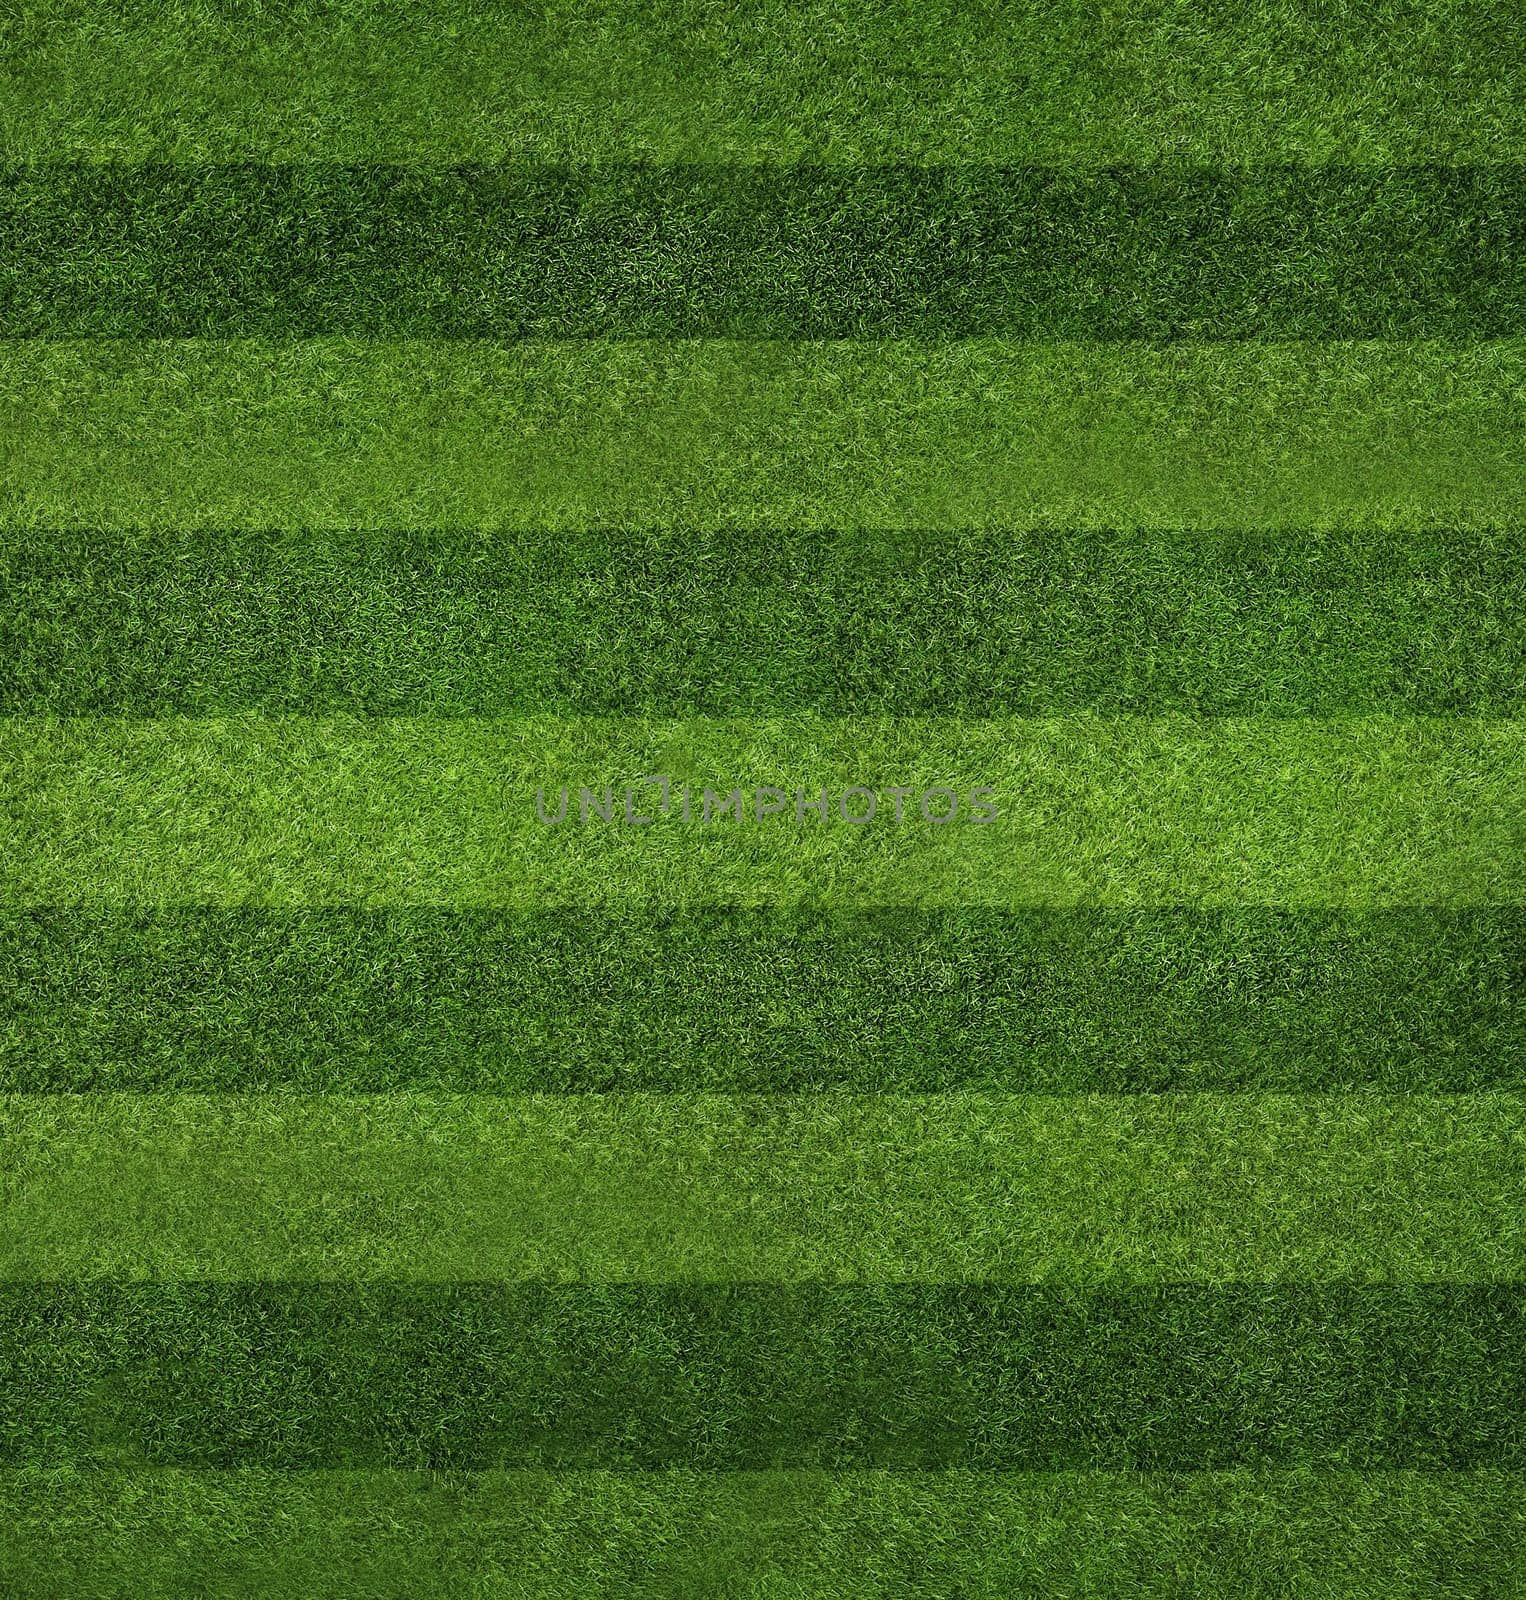 Striped green grass background image by Mastak80